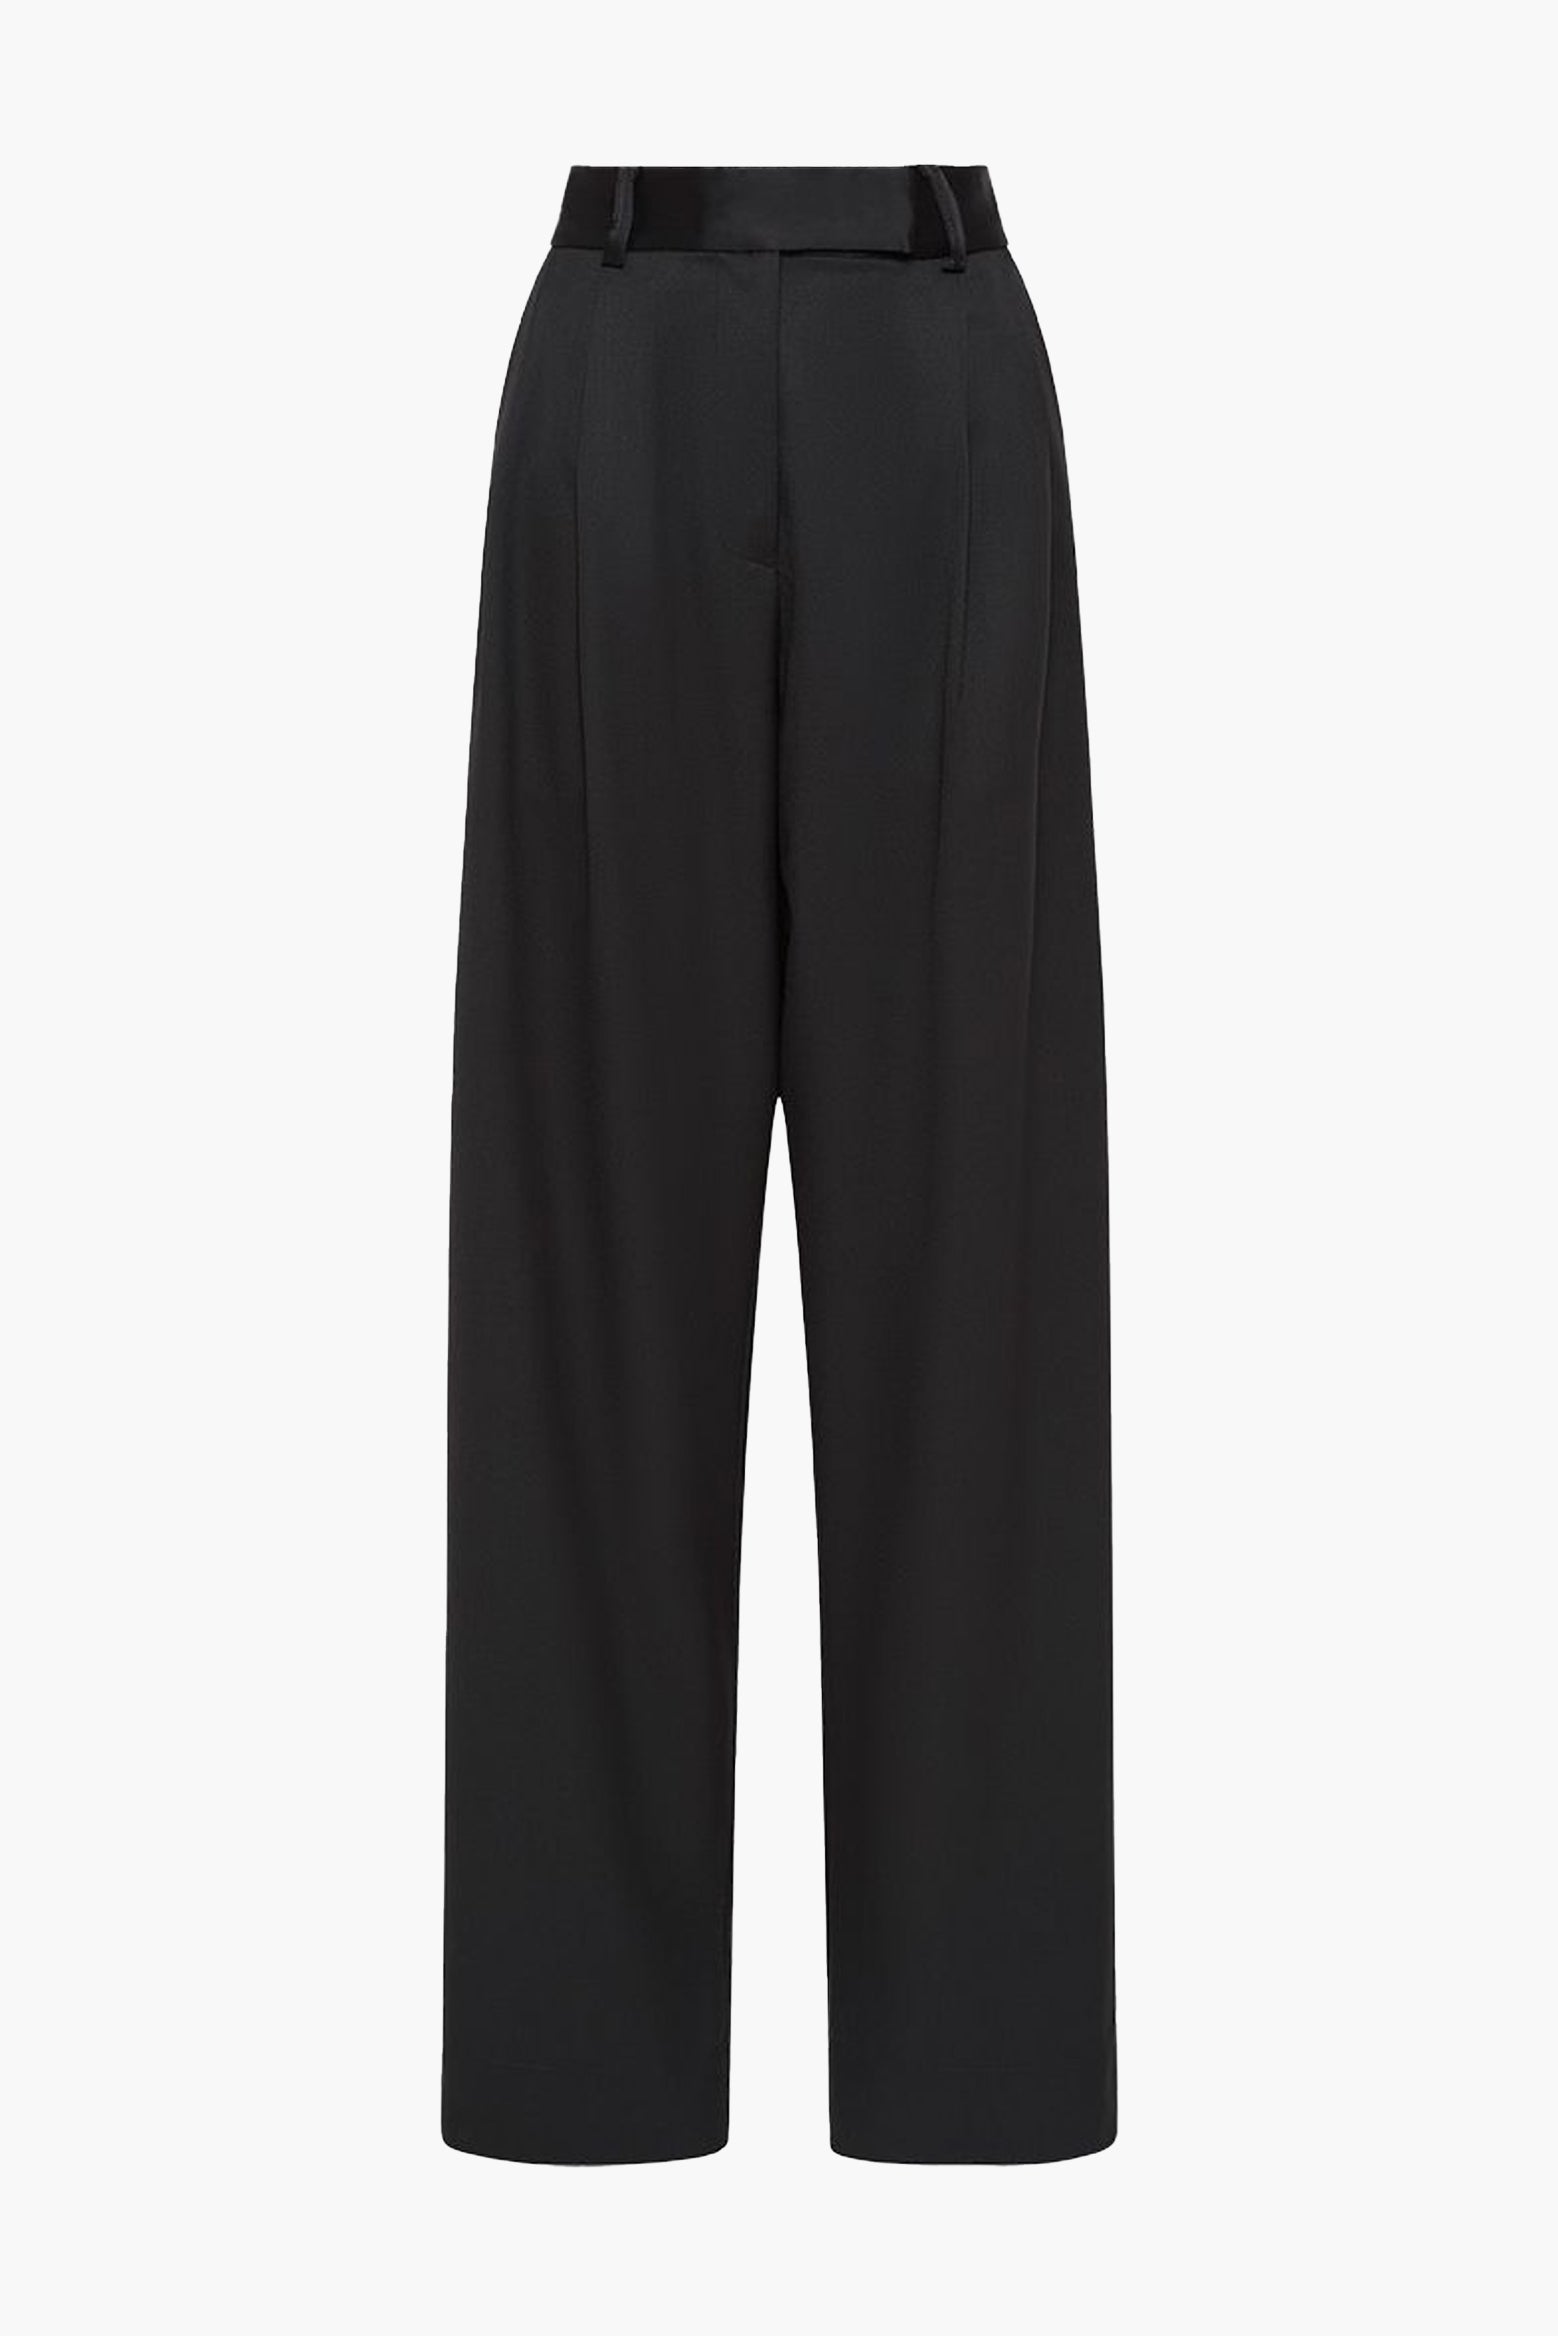 ESSE STUDIOS Tux Tailored Trouser in Black available at The New Trend